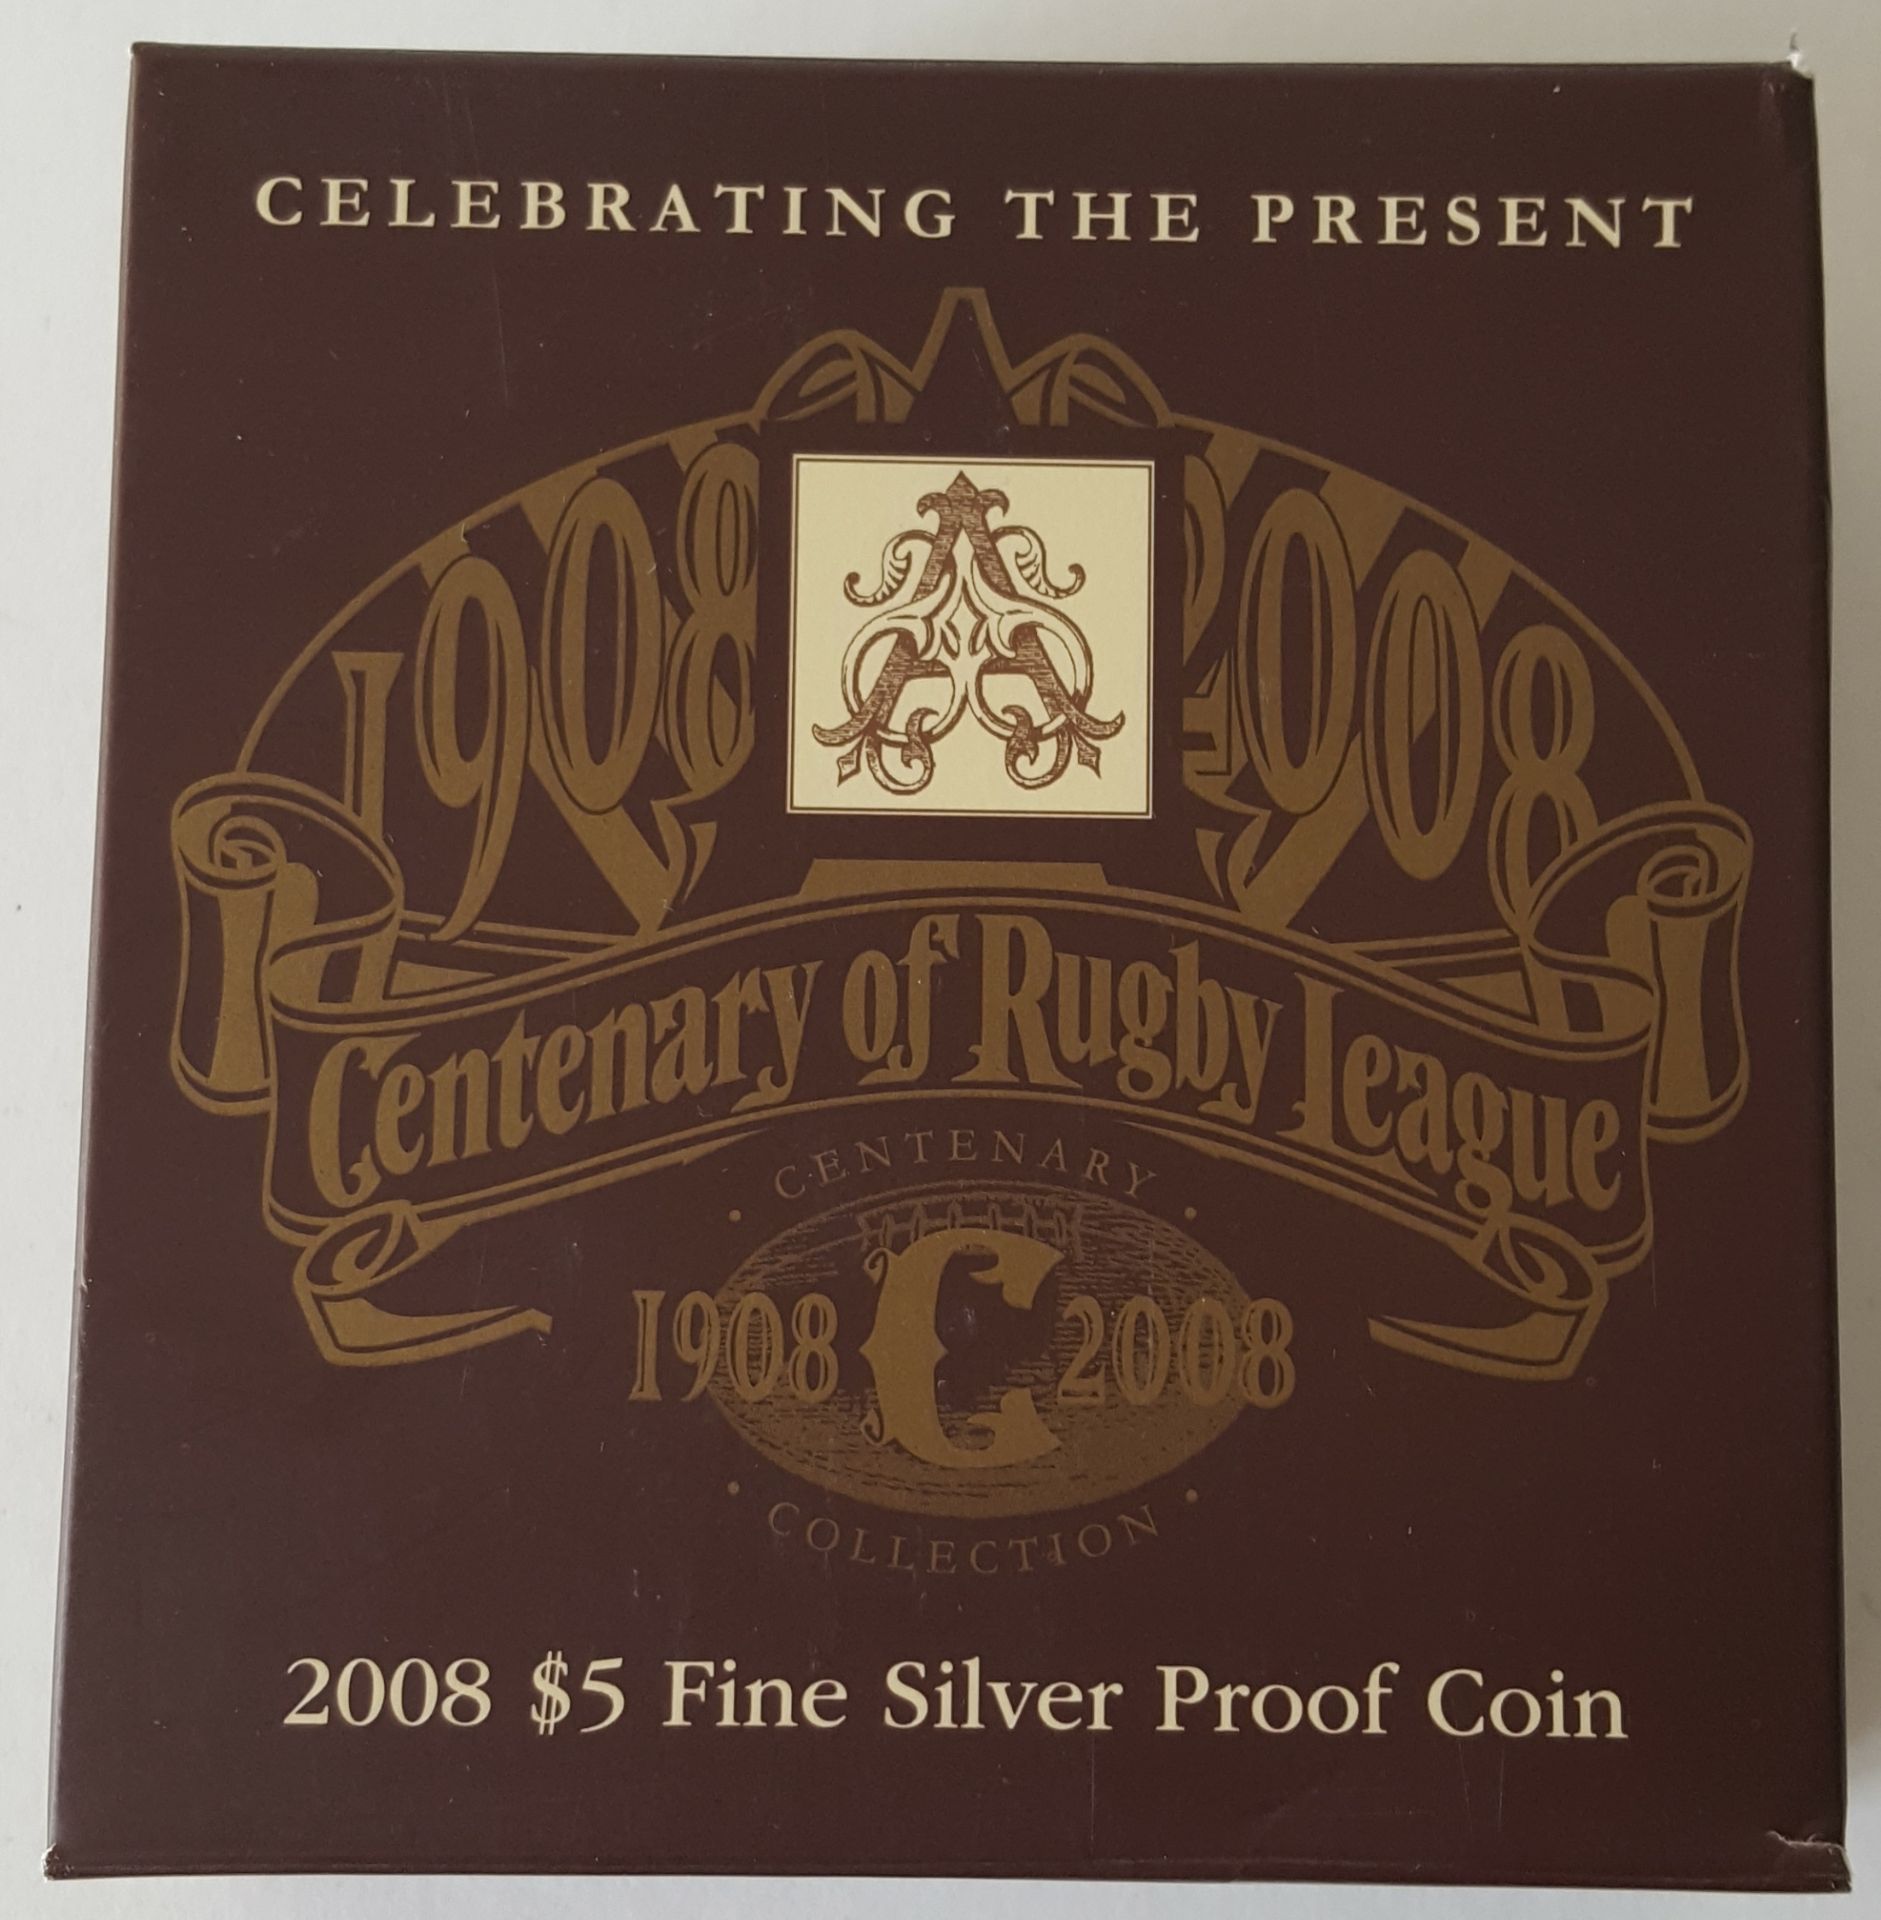 Collectable Coin Australian Royal Mint 2008 Centenary of Rugby League $5 Silver Proof - Image 3 of 5